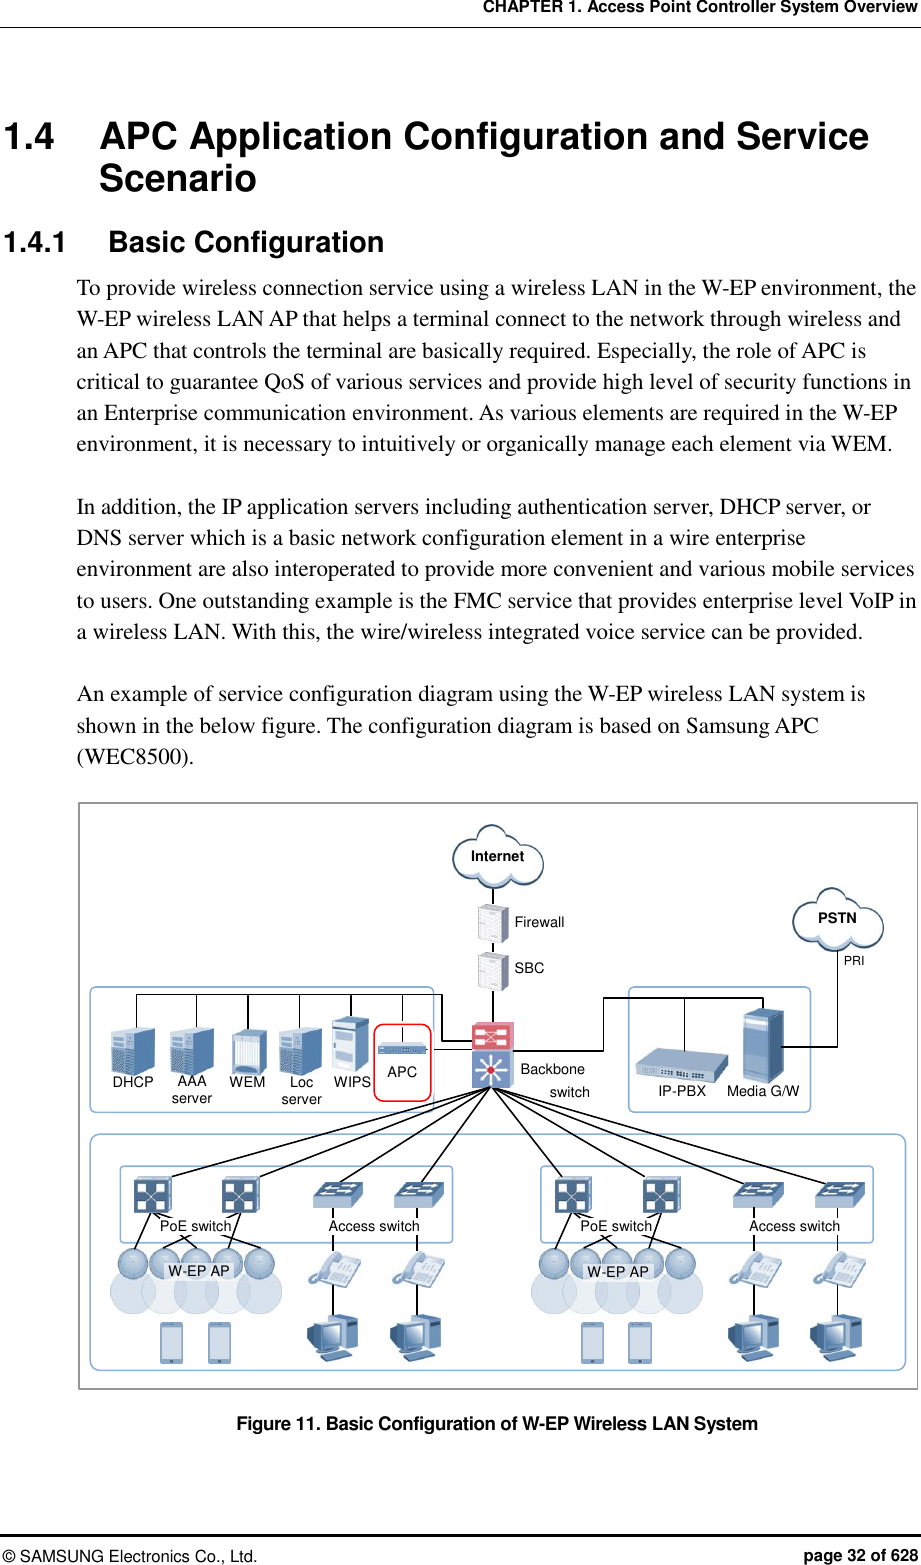 CHAPTER 1. Access Point Controller System Overview ©  SAMSUNG Electronics Co., Ltd.  page 32 of 628 1.4  APC Application Configuration and Service Scenario 1.4.1  Basic Configuration To provide wireless connection service using a wireless LAN in the W-EP environment, the W-EP wireless LAN AP that helps a terminal connect to the network through wireless and an APC that controls the terminal are basically required. Especially, the role of APC is critical to guarantee QoS of various services and provide high level of security functions in an Enterprise communication environment. As various elements are required in the W-EP environment, it is necessary to intuitively or organically manage each element via WEM.    In addition, the IP application servers including authentication server, DHCP server, or DNS server which is a basic network configuration element in a wire enterprise environment are also interoperated to provide more convenient and various mobile services to users. One outstanding example is the FMC service that provides enterprise level VoIP in a wireless LAN. With this, the wire/wireless integrated voice service can be provided.  An example of service configuration diagram using the W-EP wireless LAN system is shown in the below figure. The configuration diagram is based on Samsung APC (WEC8500).  Figure 11. Basic Configuration of W-EP Wireless LAN System  PRI Firewall Internet Backbone switch SBC PSTN IP-PBX Media G/W APC WIPS Loc server WEM AAA server DHCP W-EP AP PoE switch Access switch PoE switch Access switch W-EP AP 